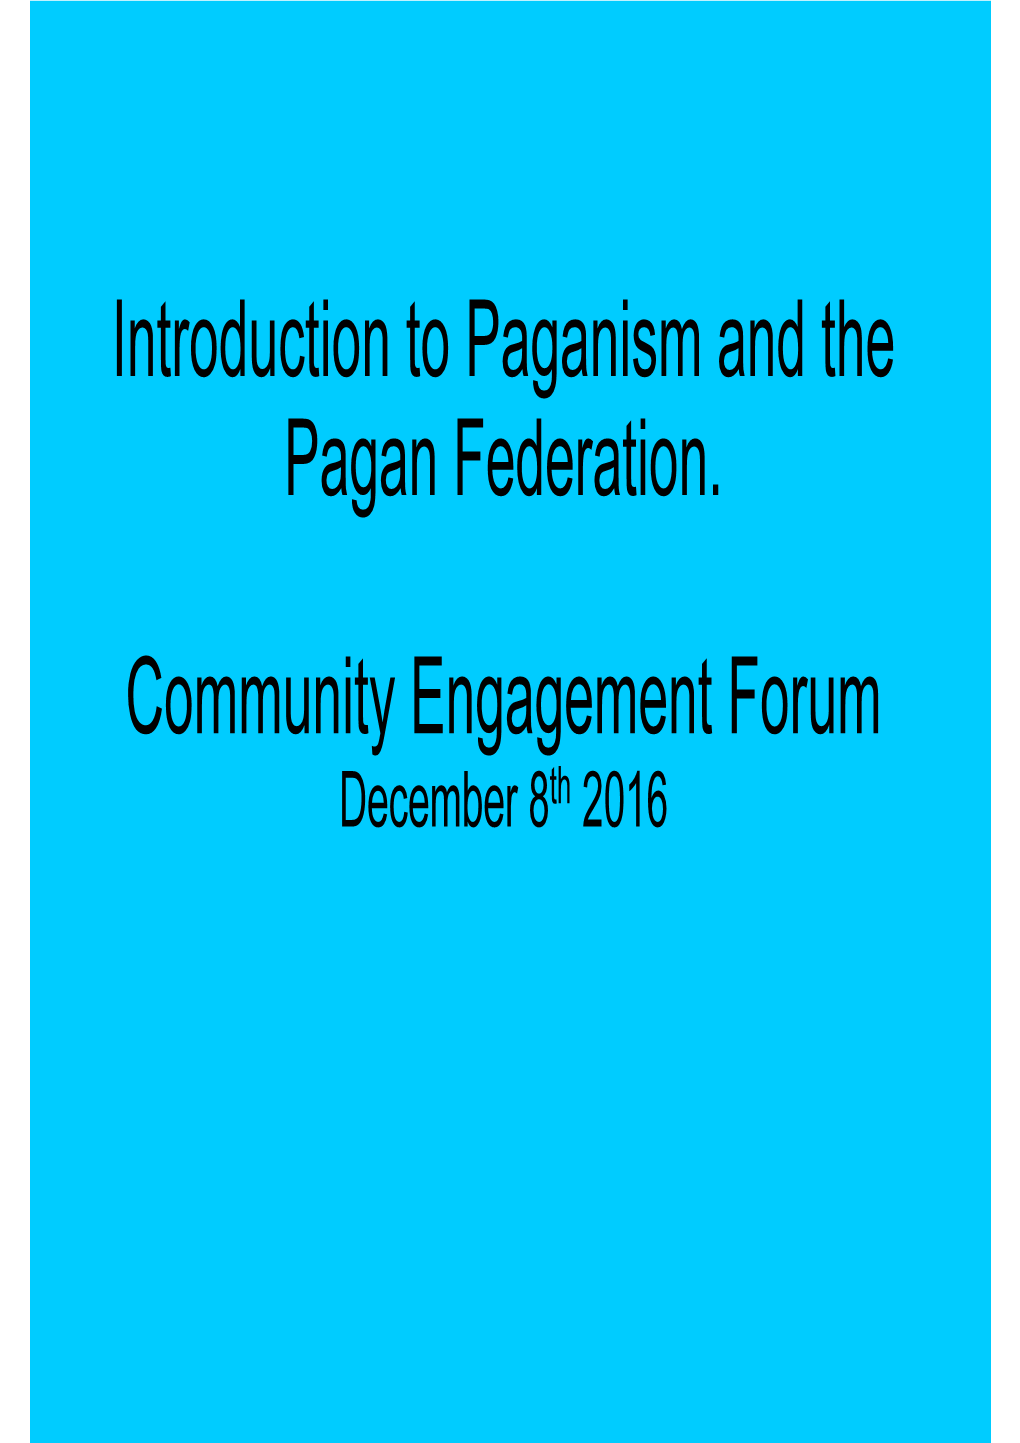 Introduction to Paganism and the Pagan Federation. Community